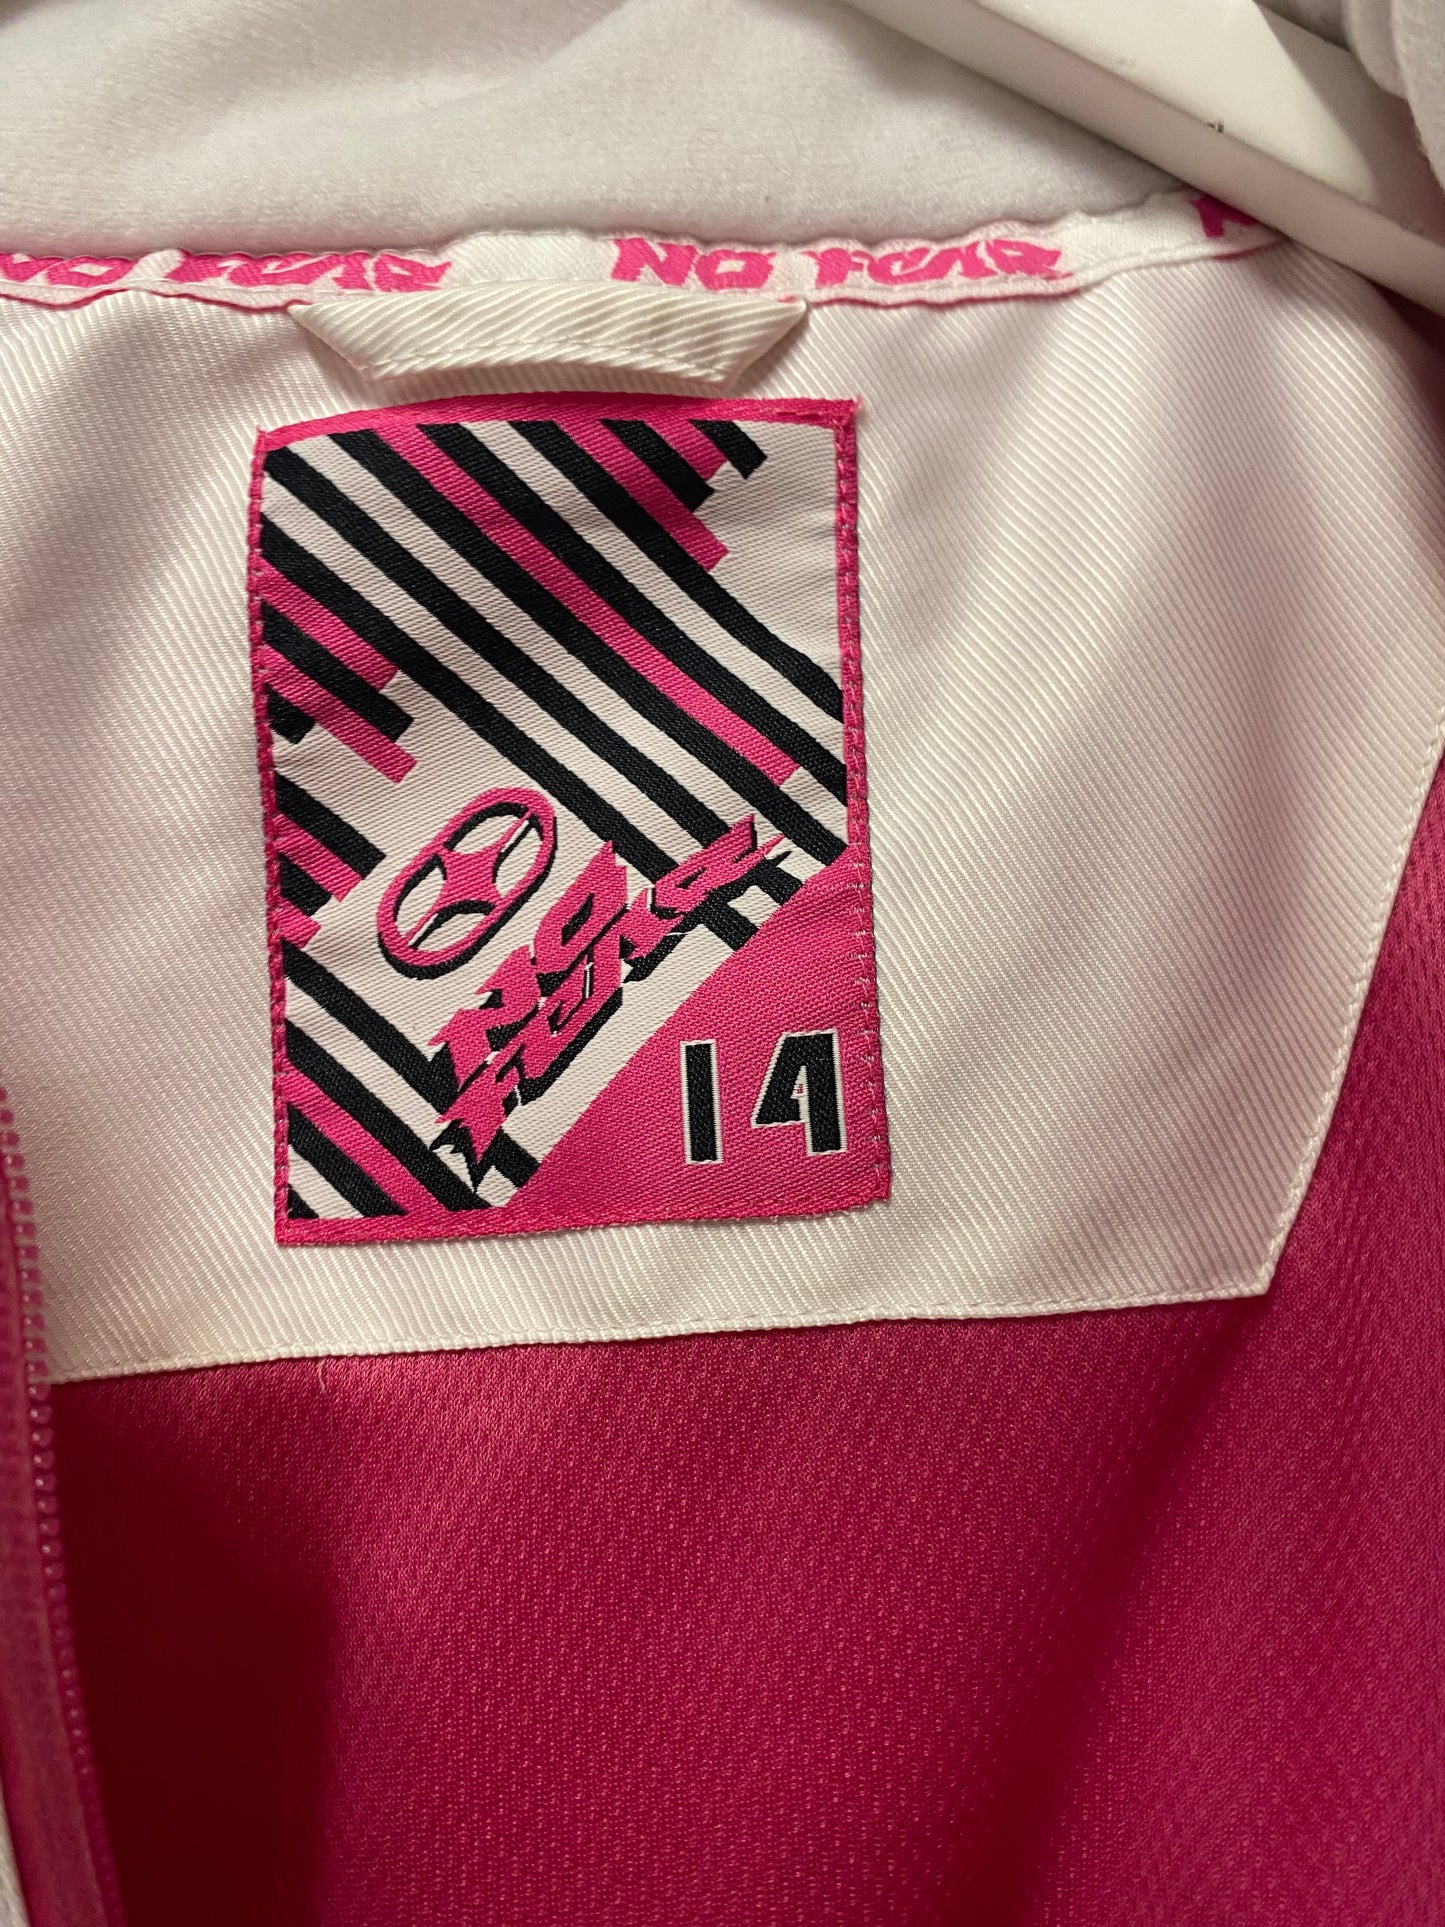 No Fear Pink and White Ski Jacket Age 14